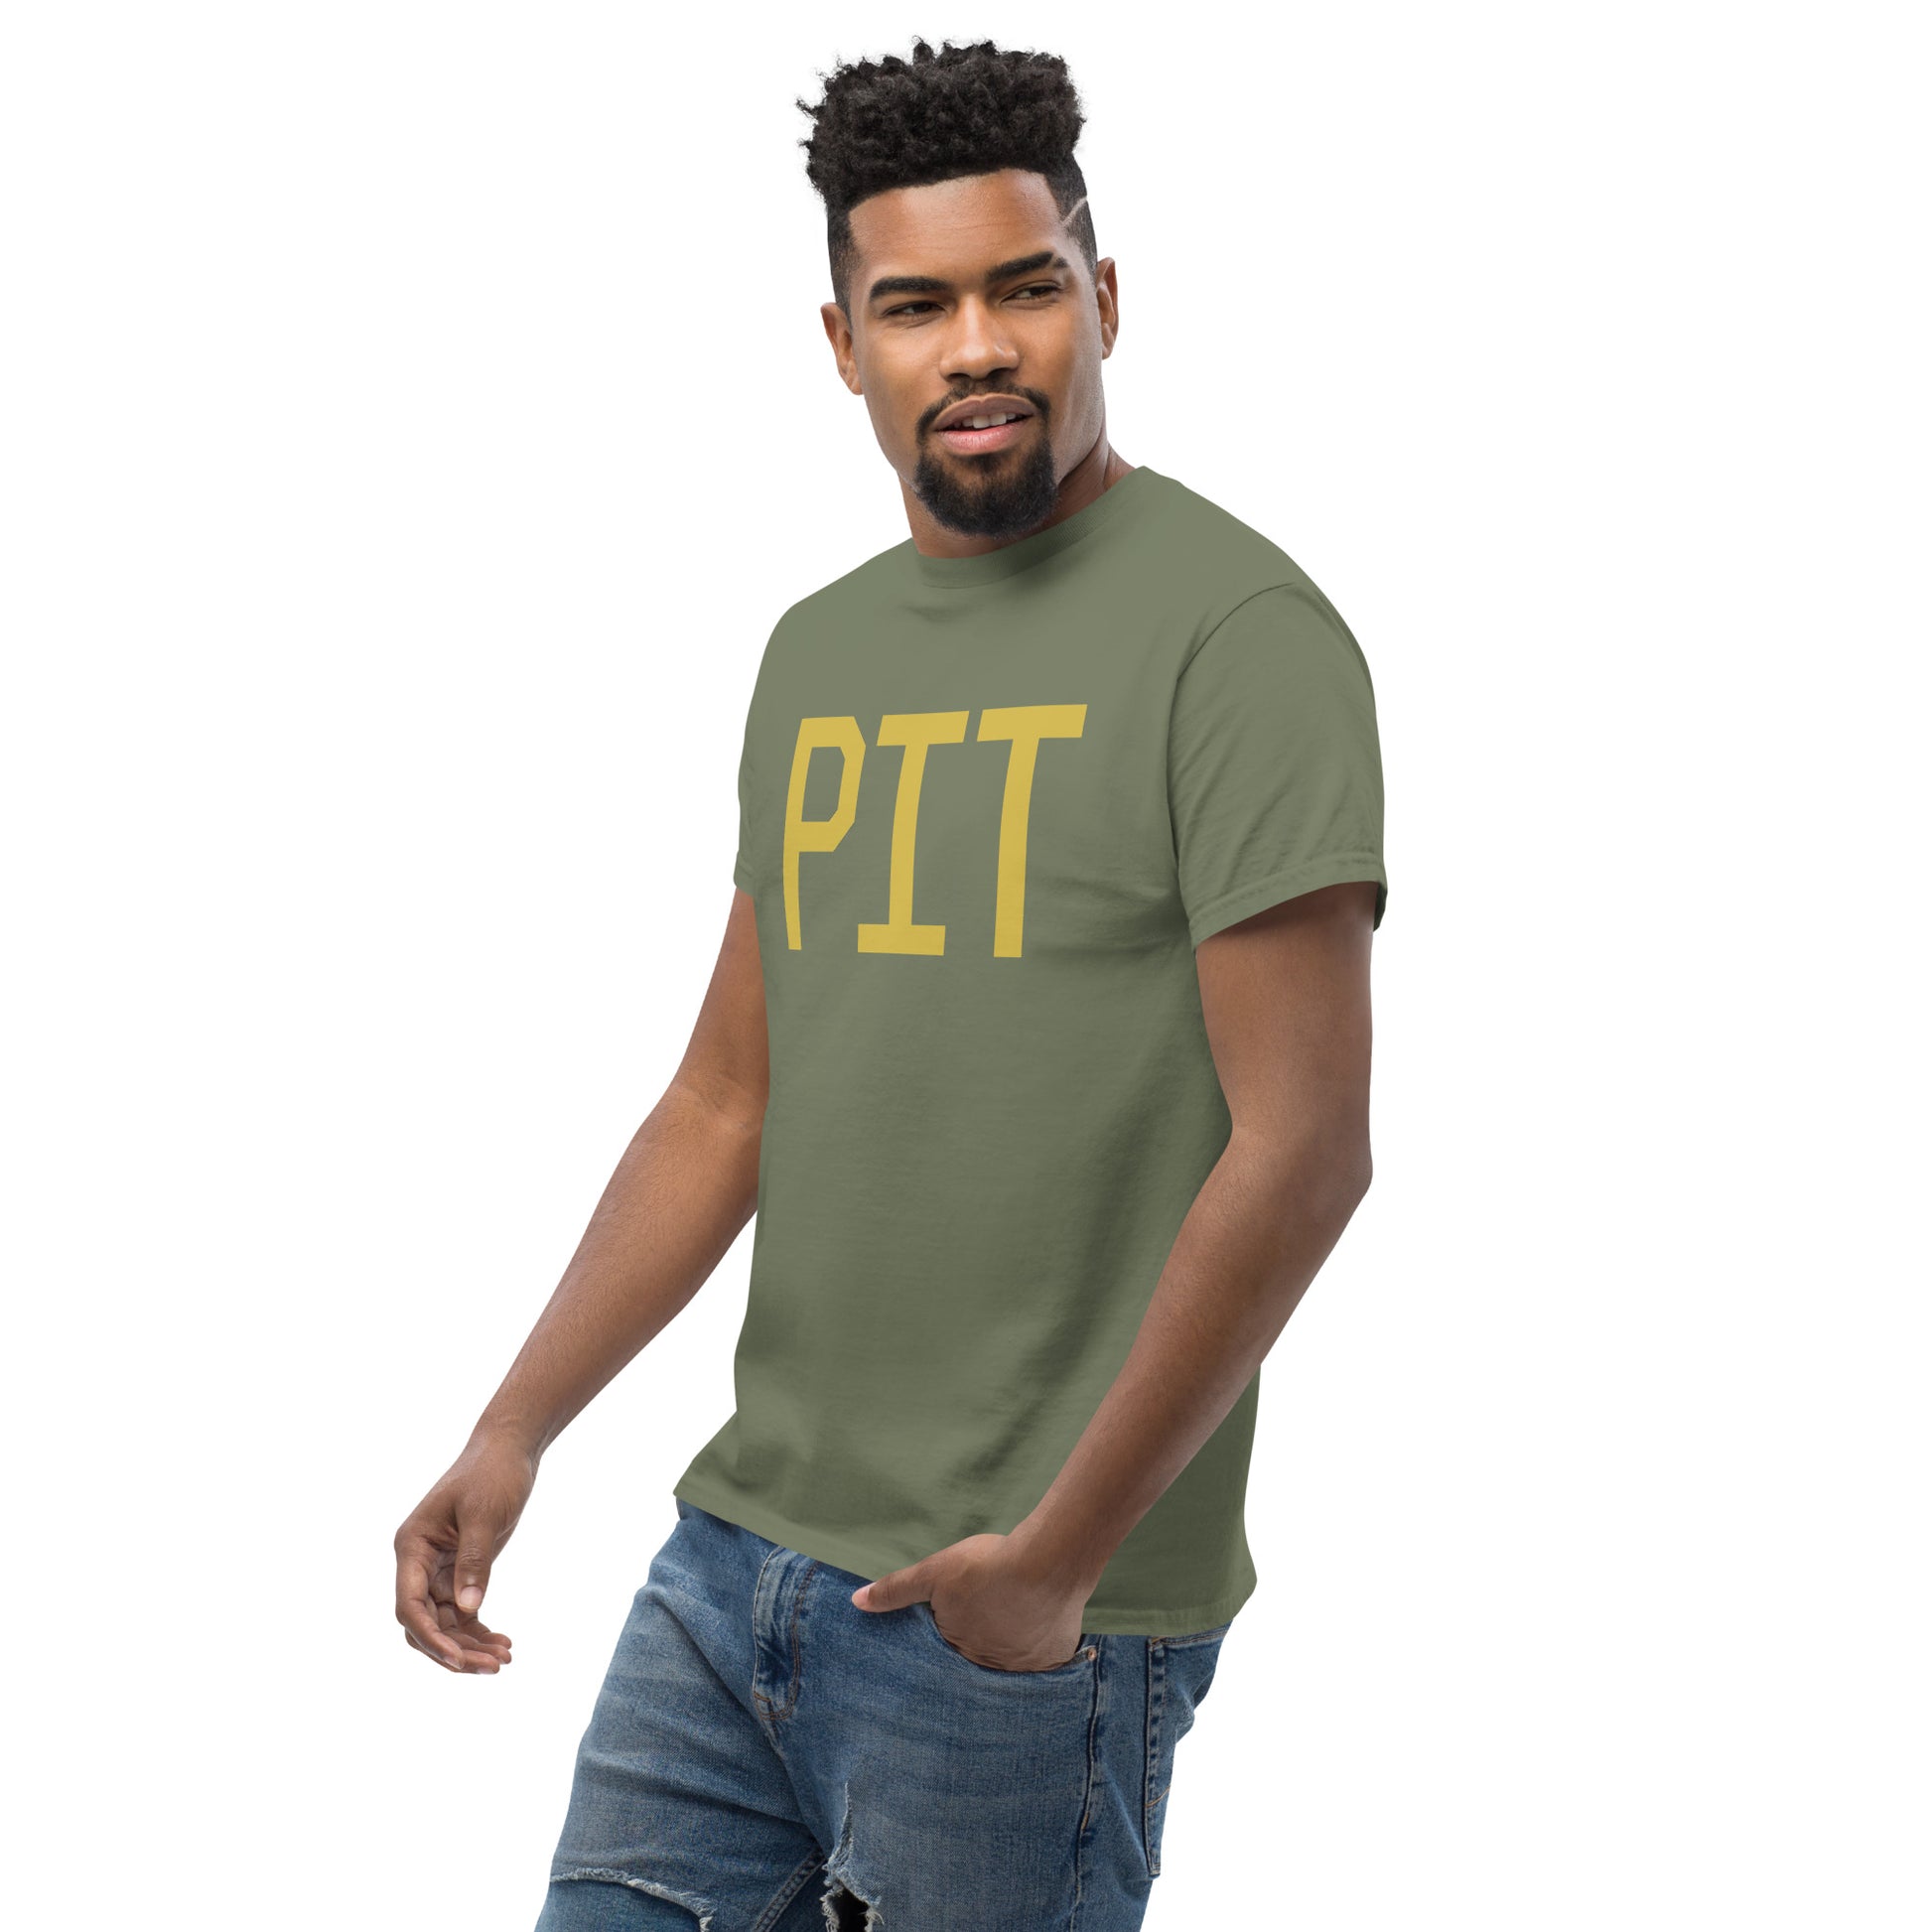 Aviation Enthusiast Men's Tee - Old Gold Graphic • PIT Pittsburgh • YHM Designs - Image 07